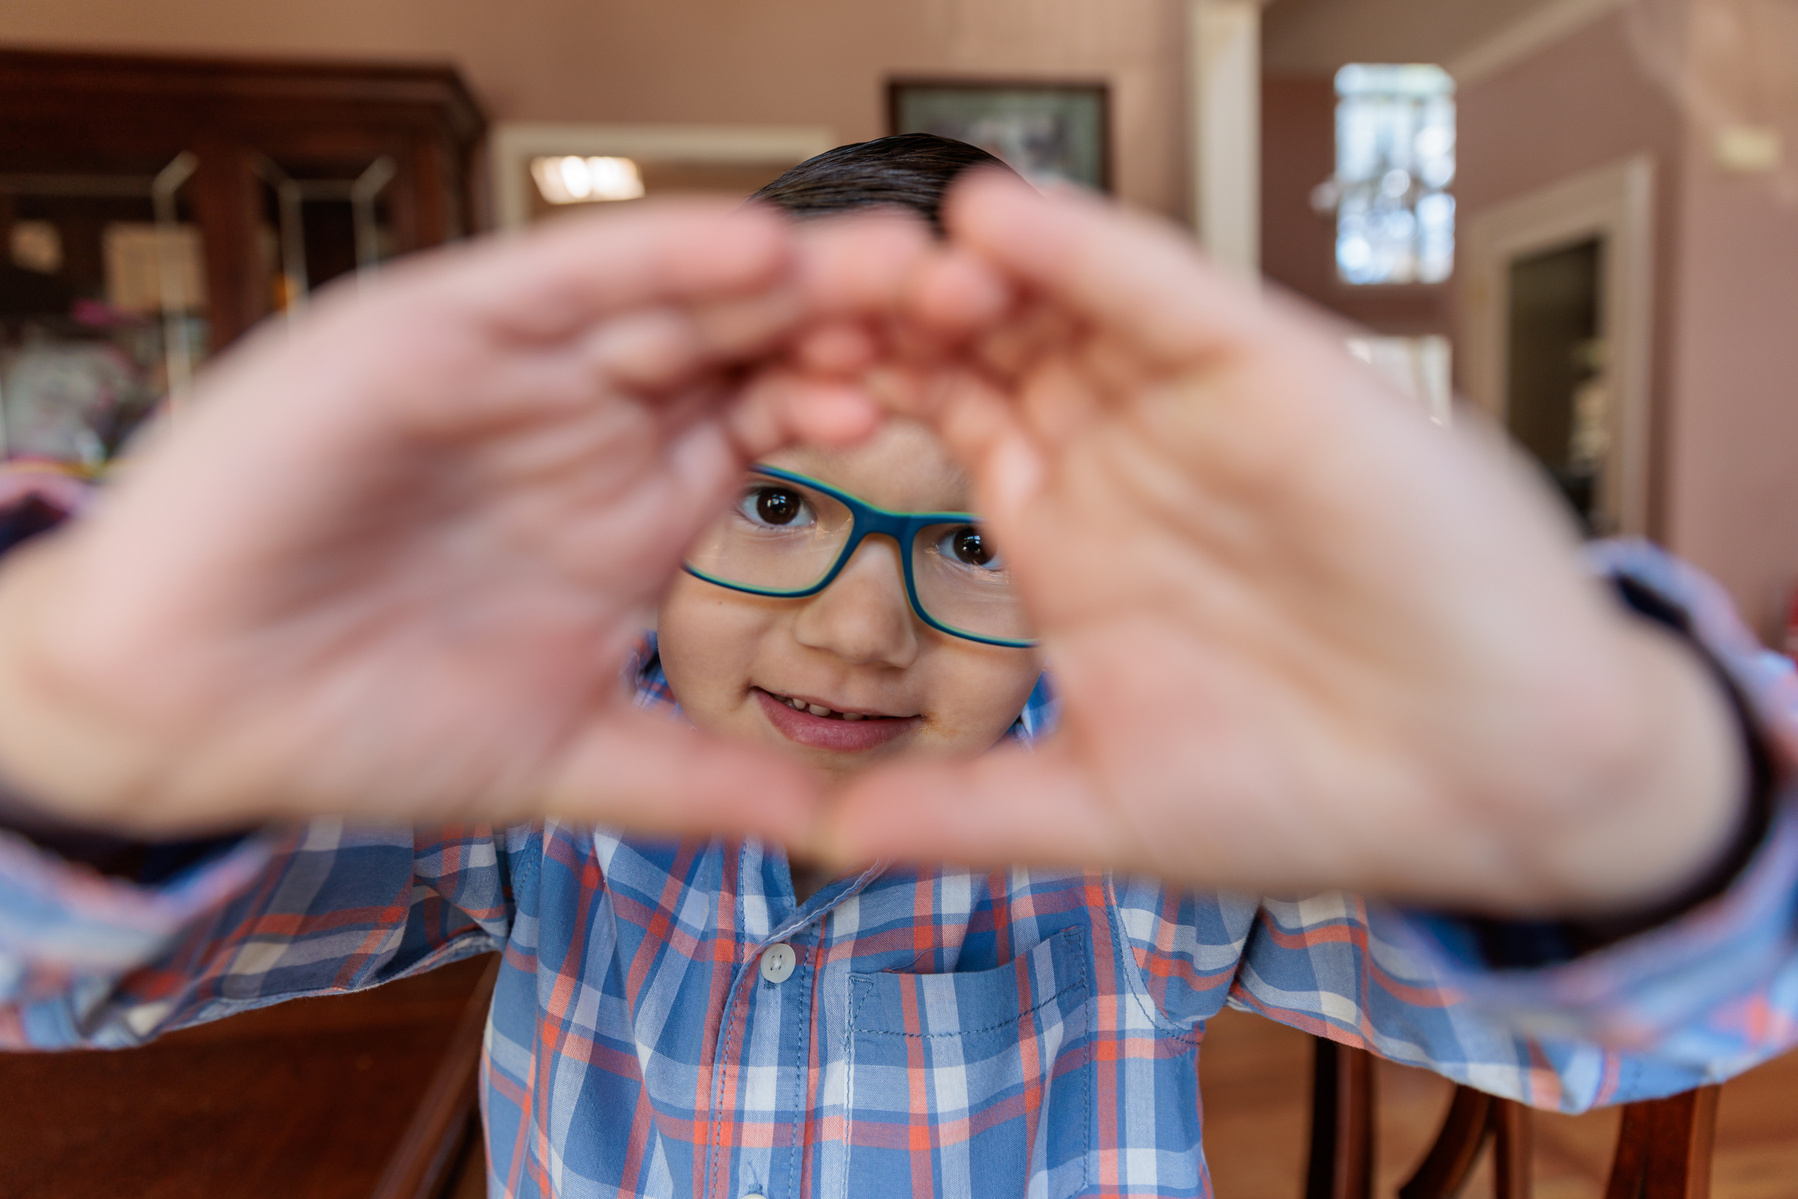 Small boy in a plaid shirt and glasses makes a square shape with his hands